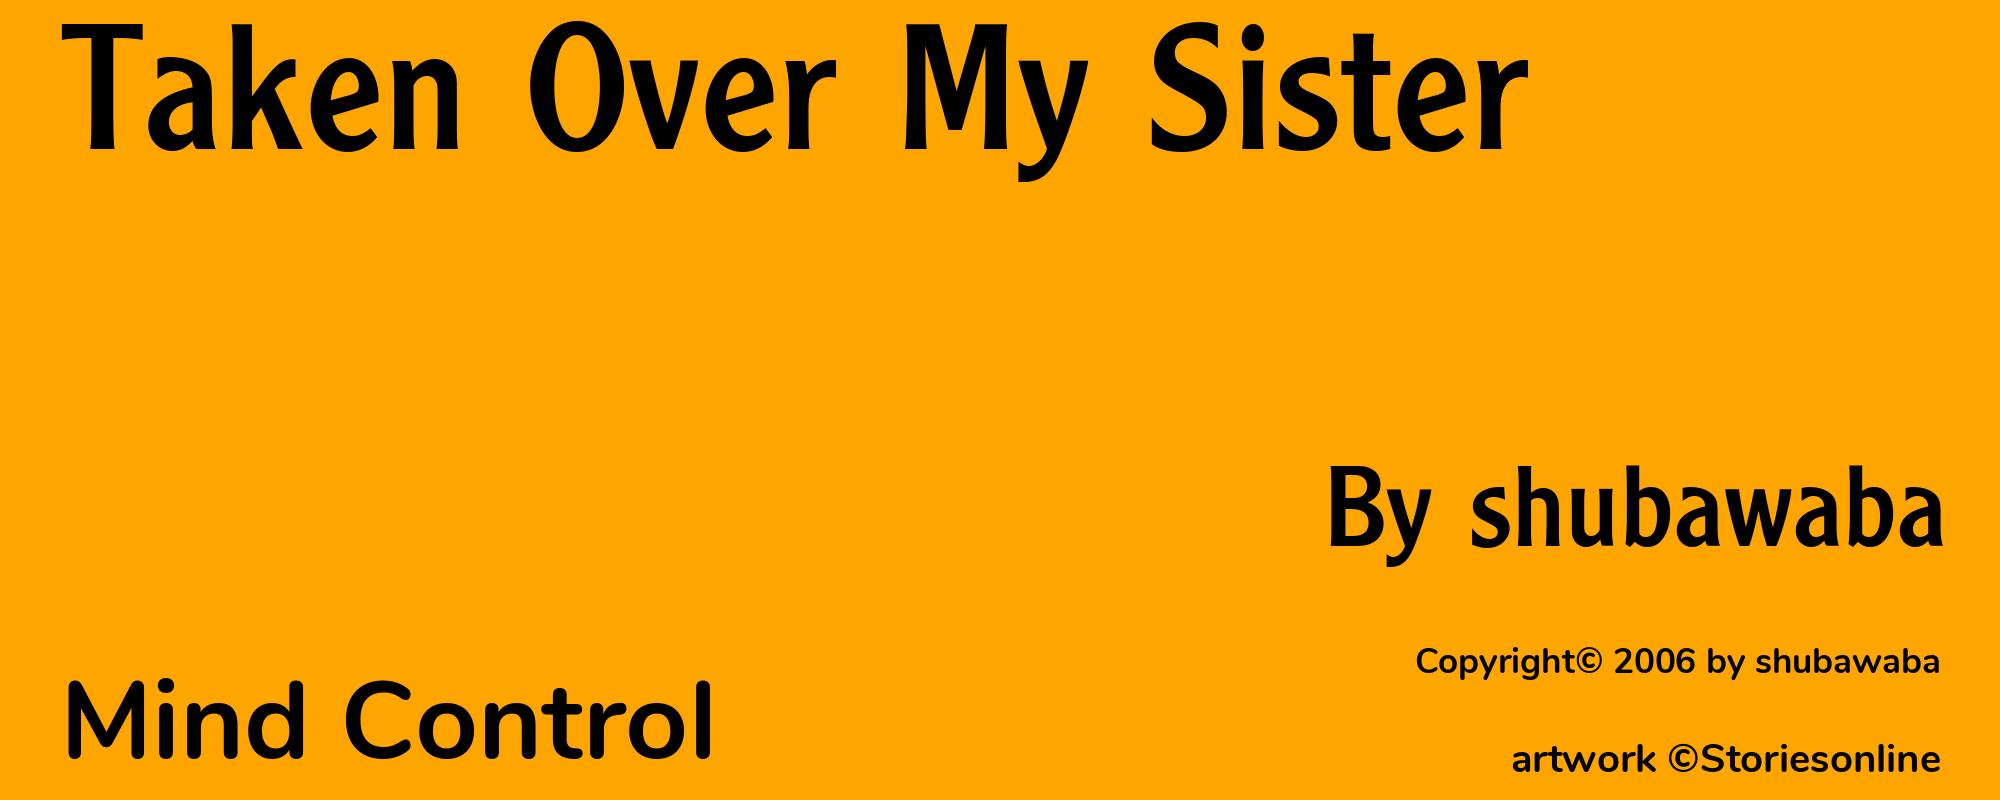 Taken Over My Sister - Cover